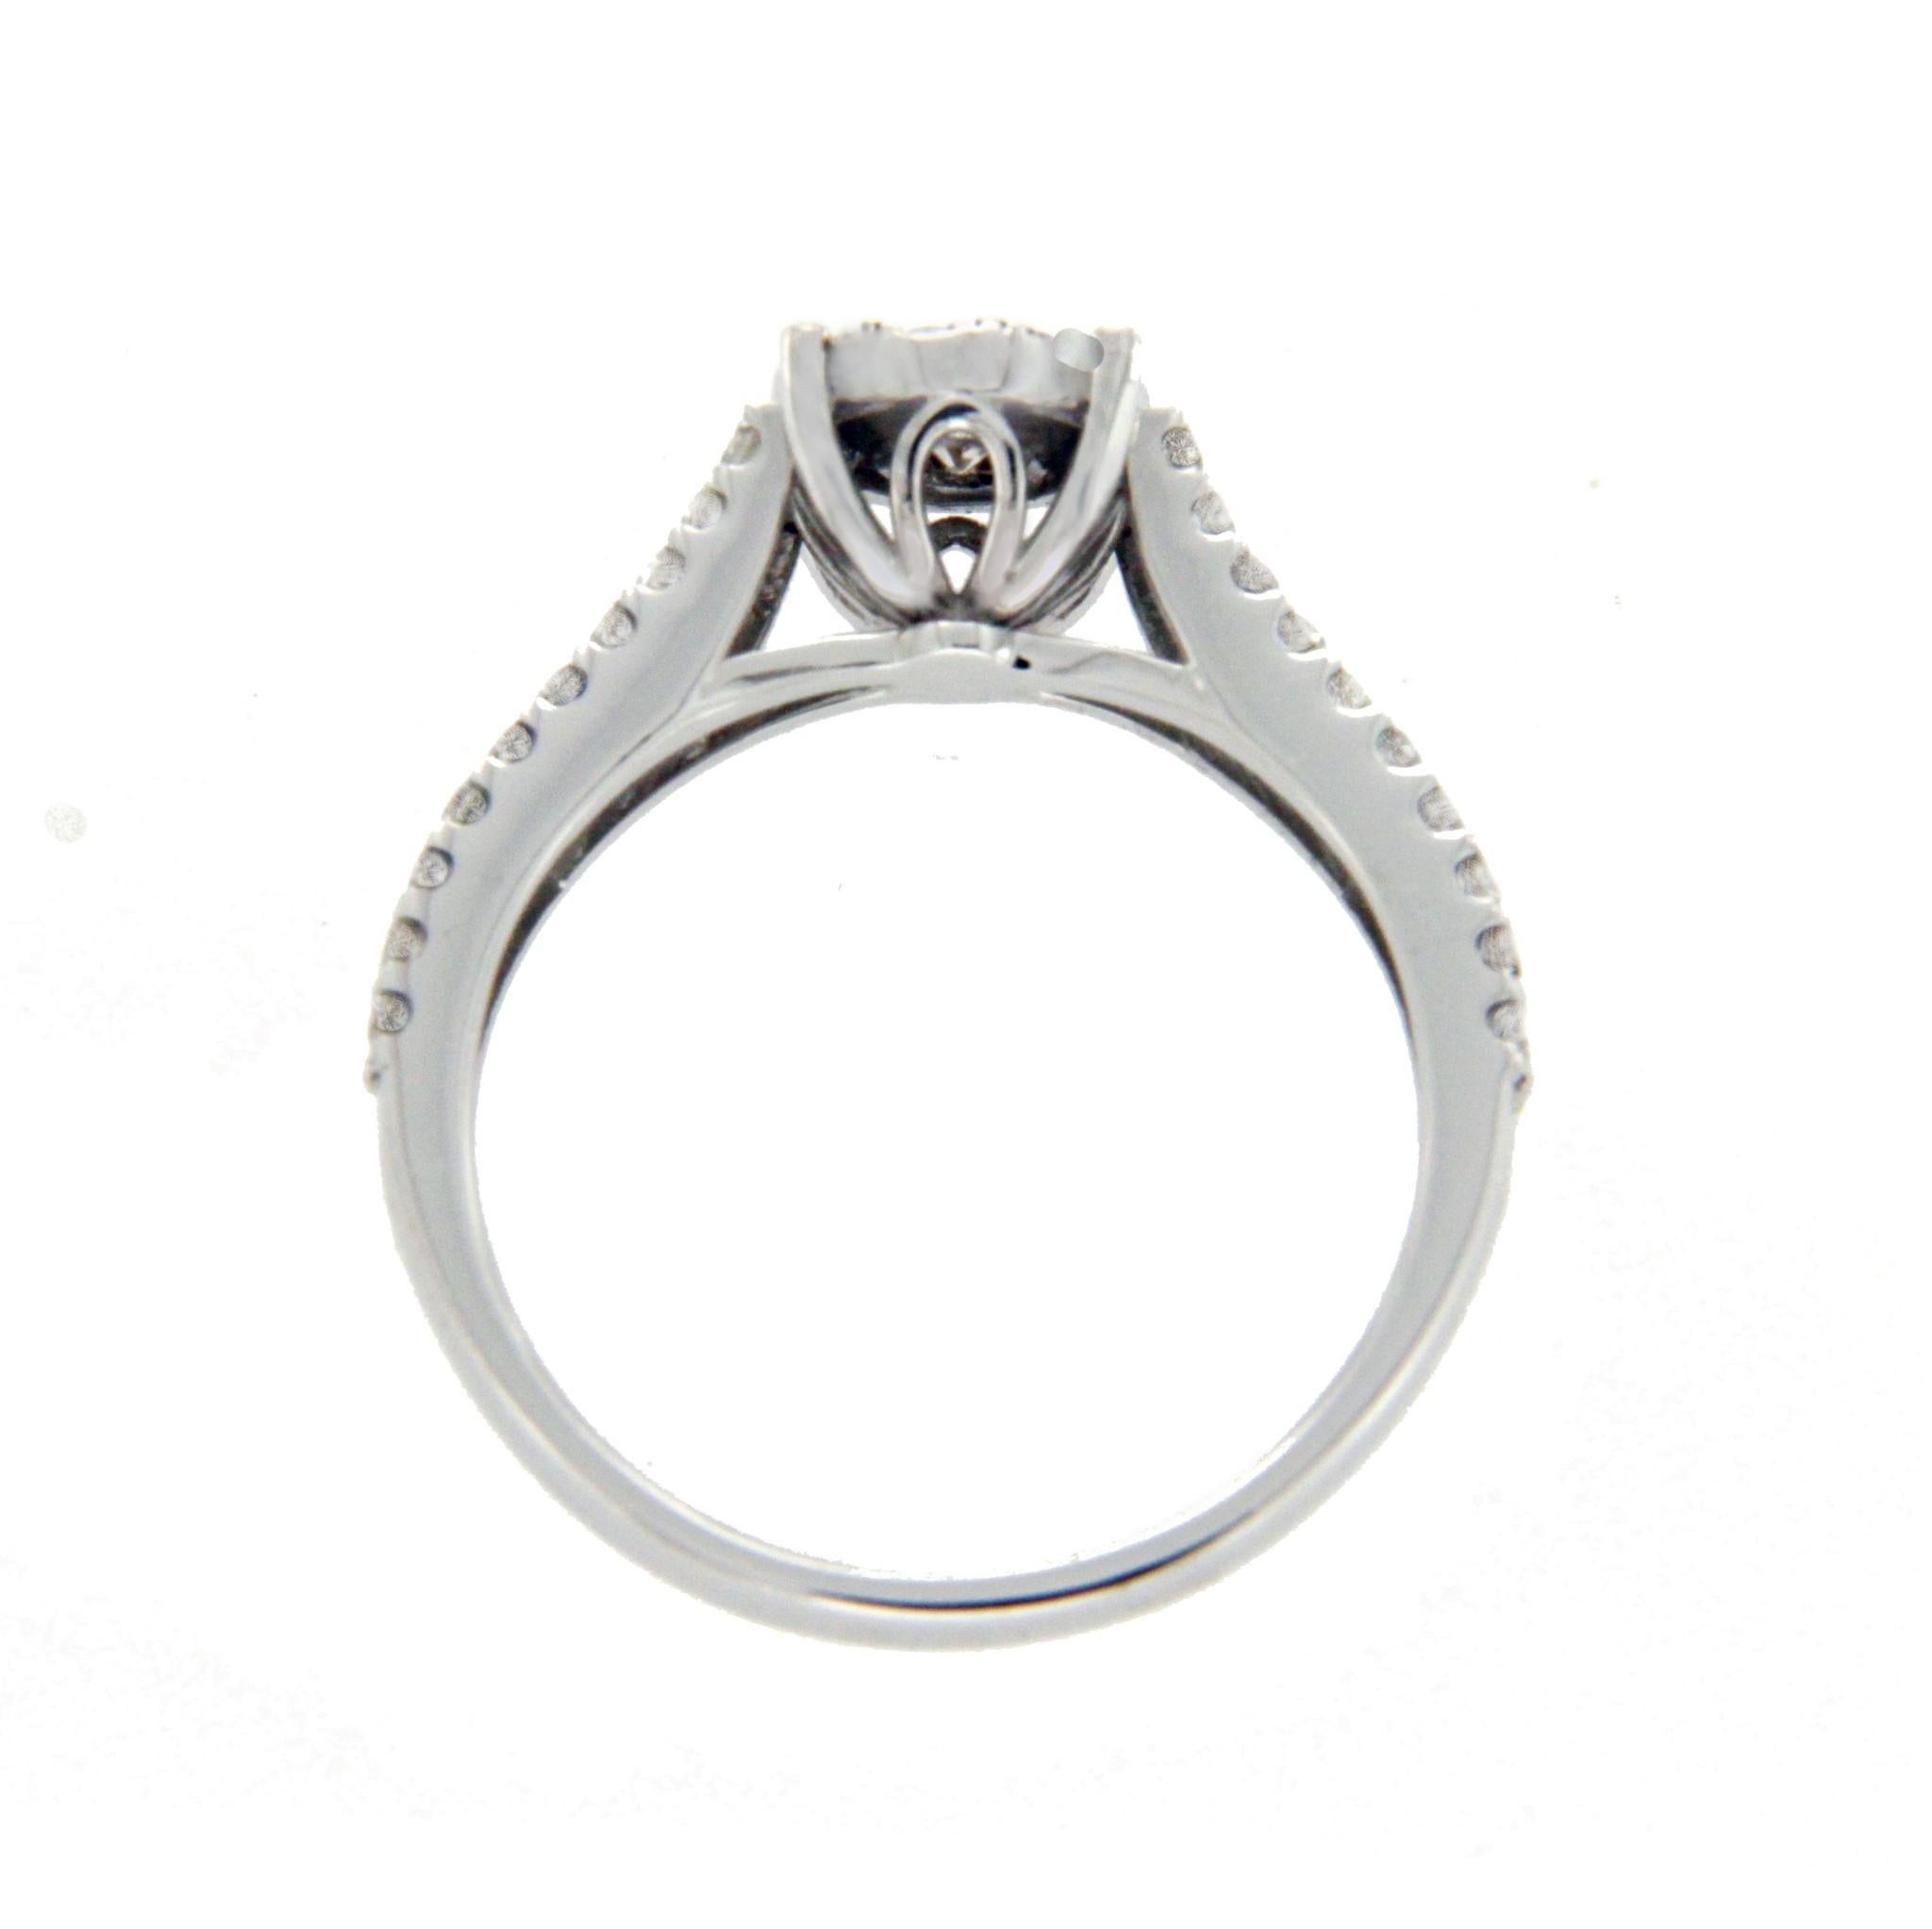 Type: Ring
Top: 7 mm
Band Width: 2.45 mm
Metal: White Gold 
Metal Purity: 14K
Hallmarks: 14K 
Total Weight: 3.2 Gram
Size: 7
Condition: New
Stone Type: 0.82 CT Diamonds